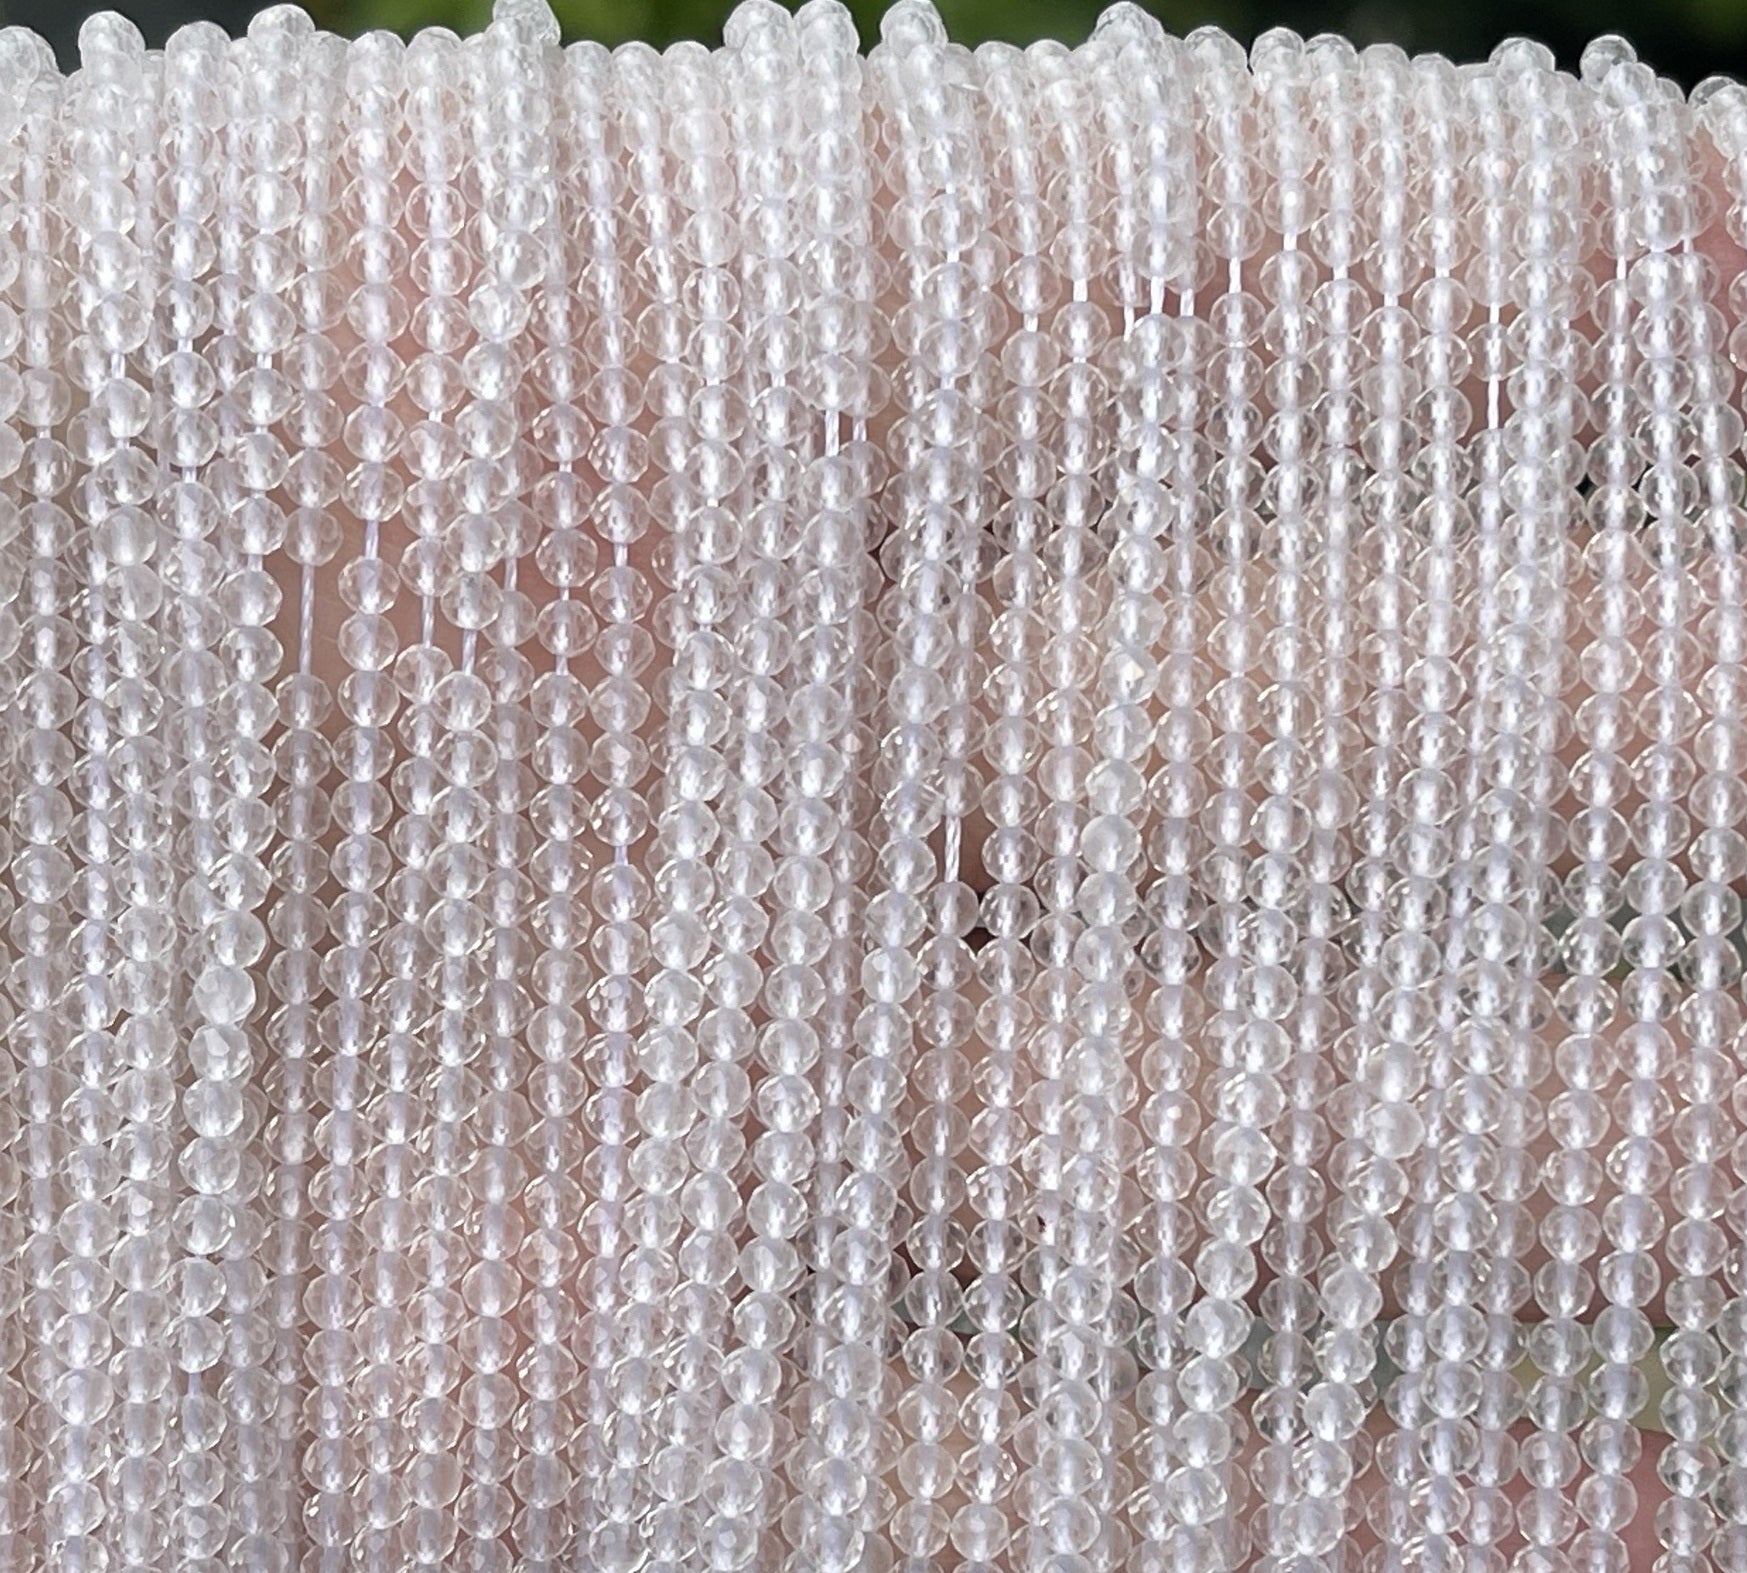 Clear Quartz 2.5mm faceted round natural gemstone beads 16" strand